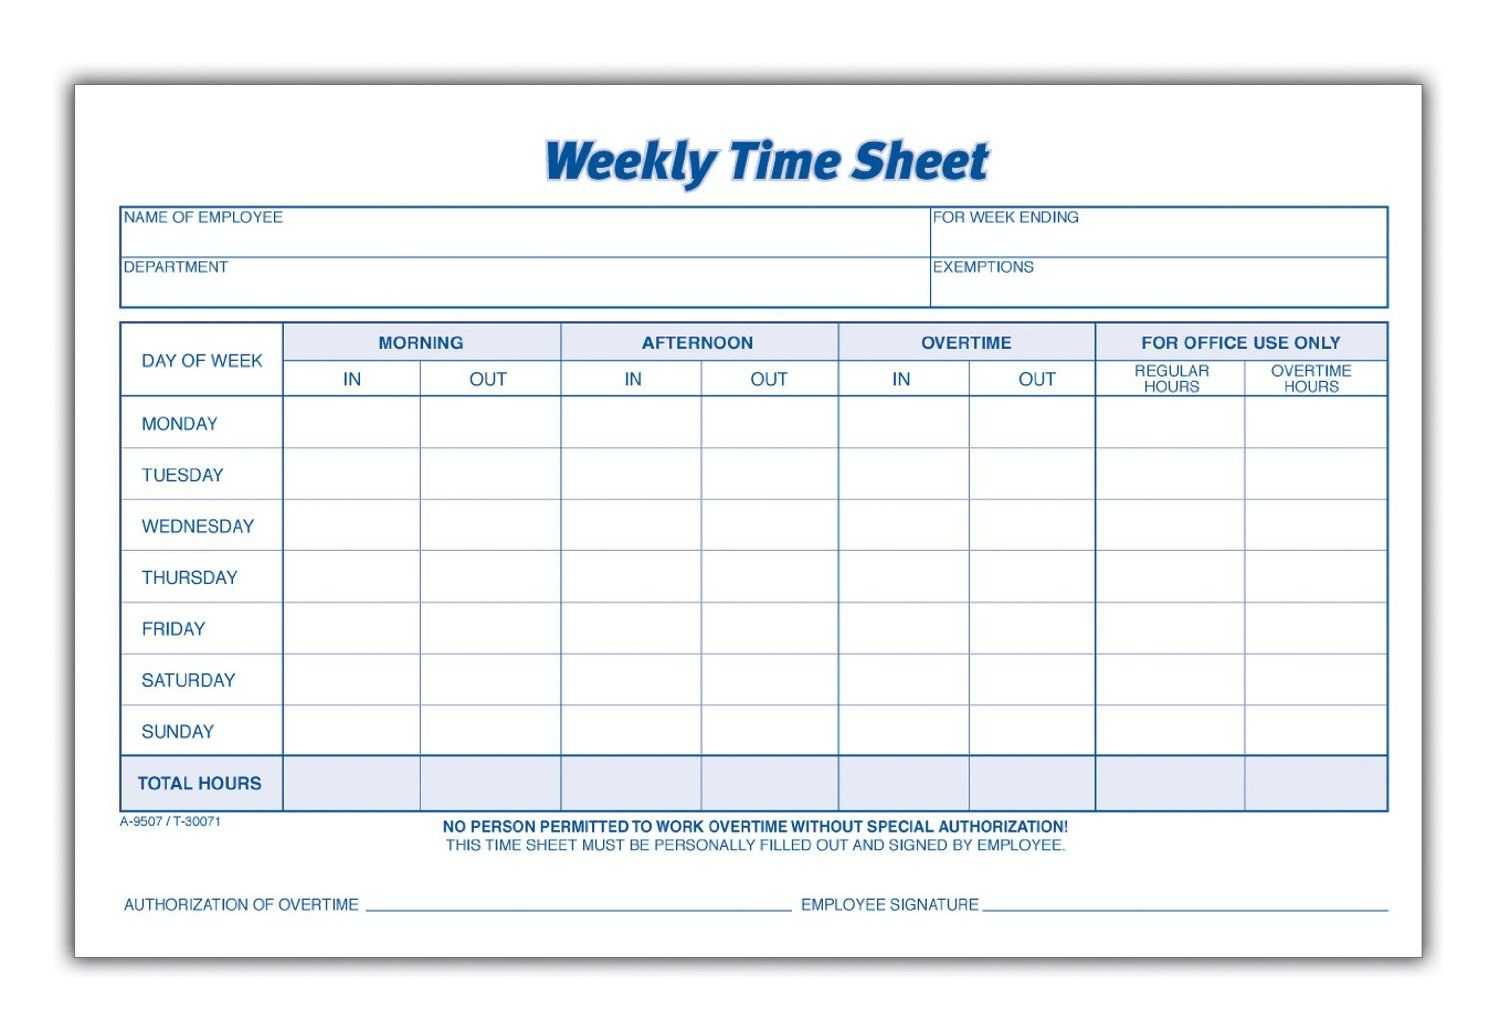 Weekly Employee Time Sheet | Good To Know | Timesheet With Regard To Weekly Time Card Template Free